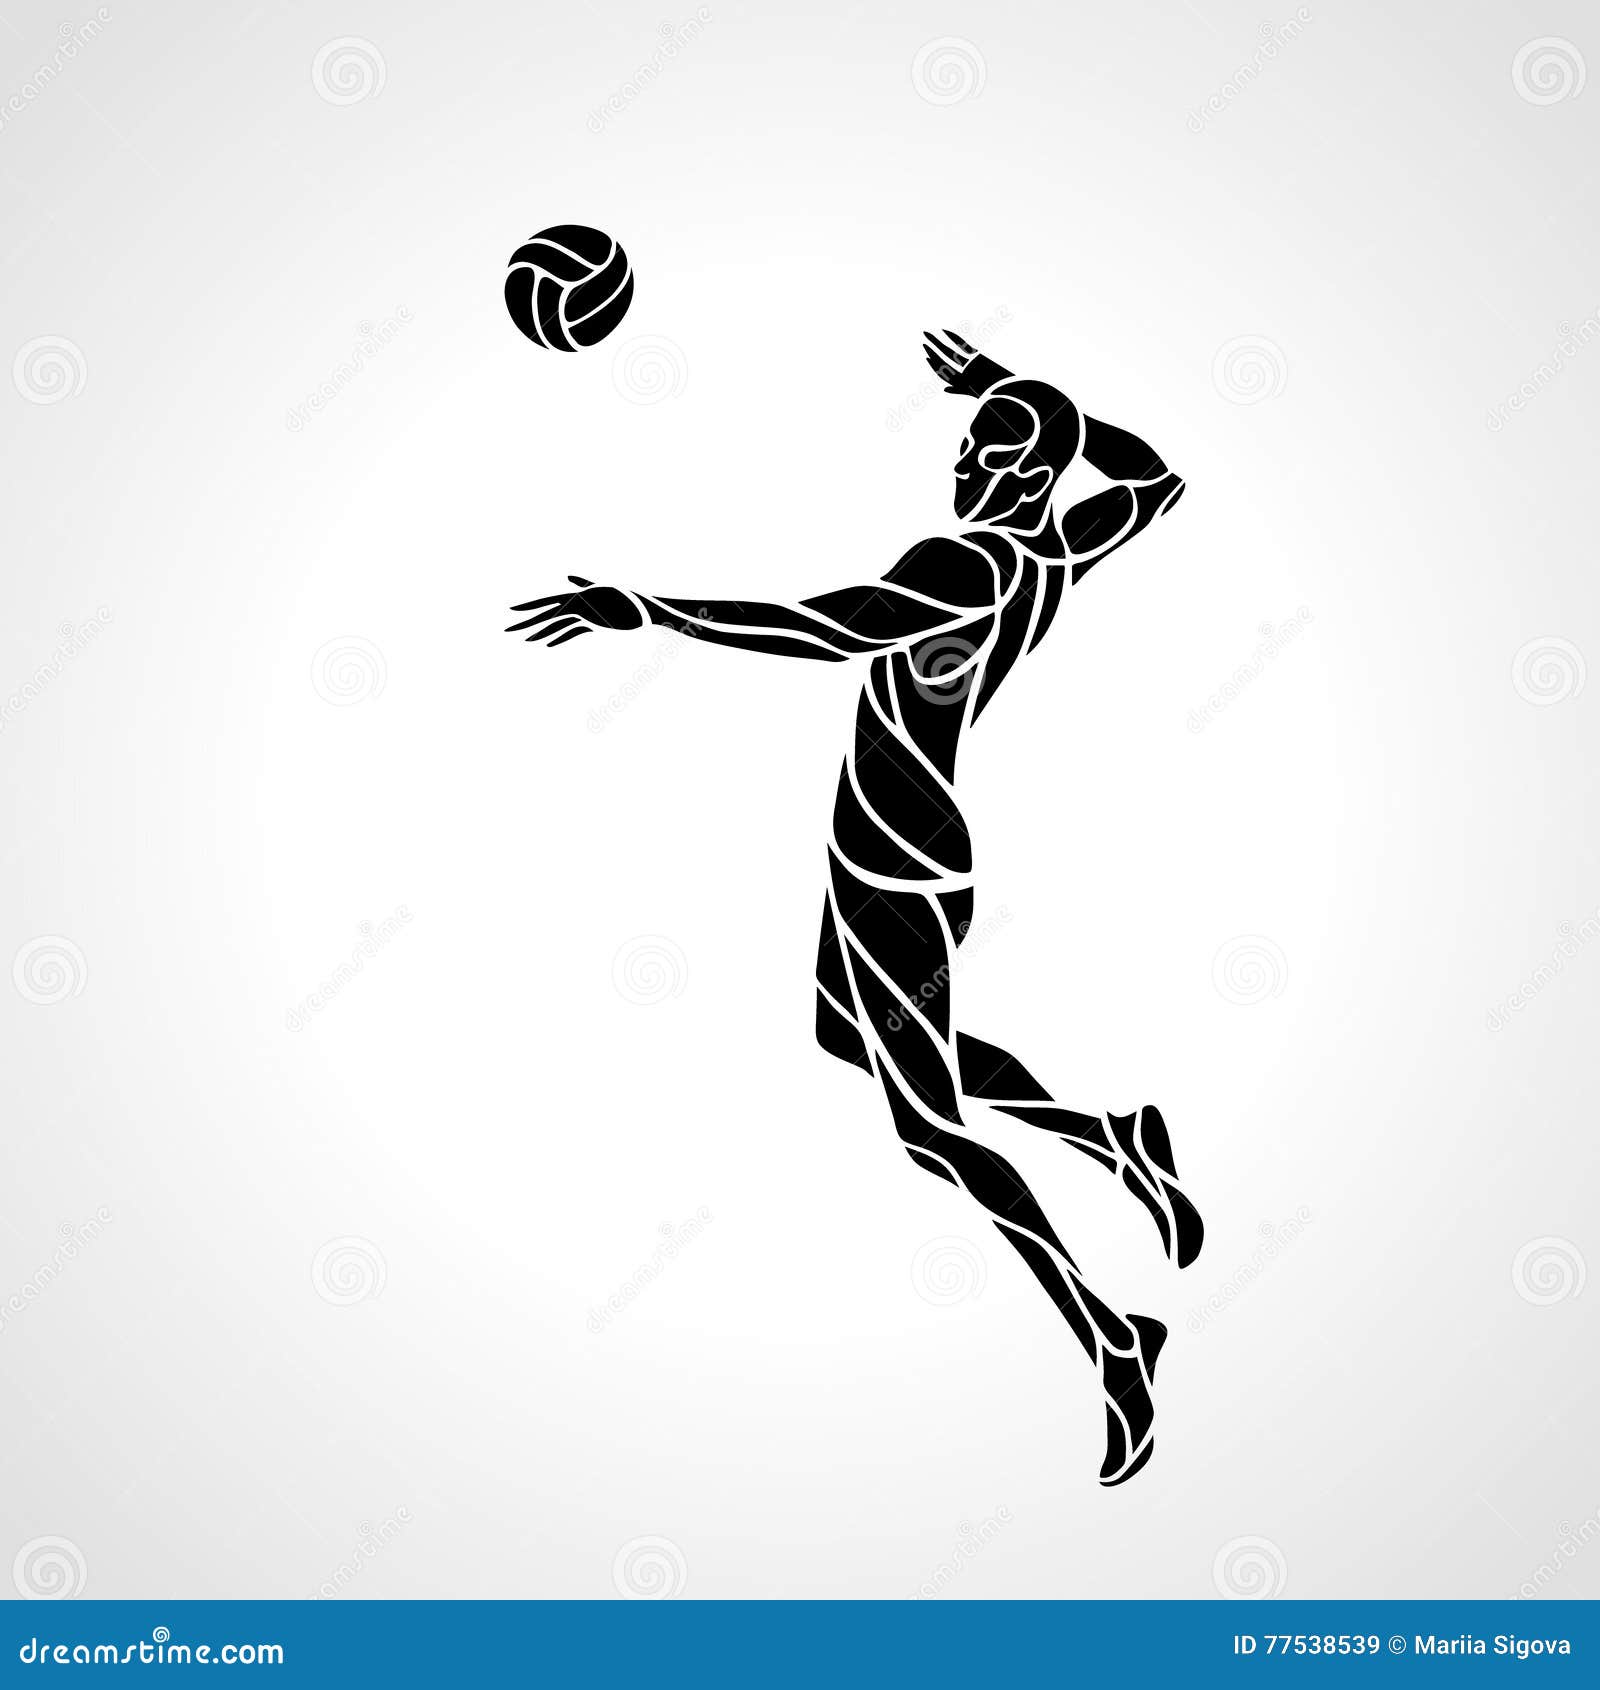 Volleyball Attacker Player Silhouette Stock Vector - Illustration of ...